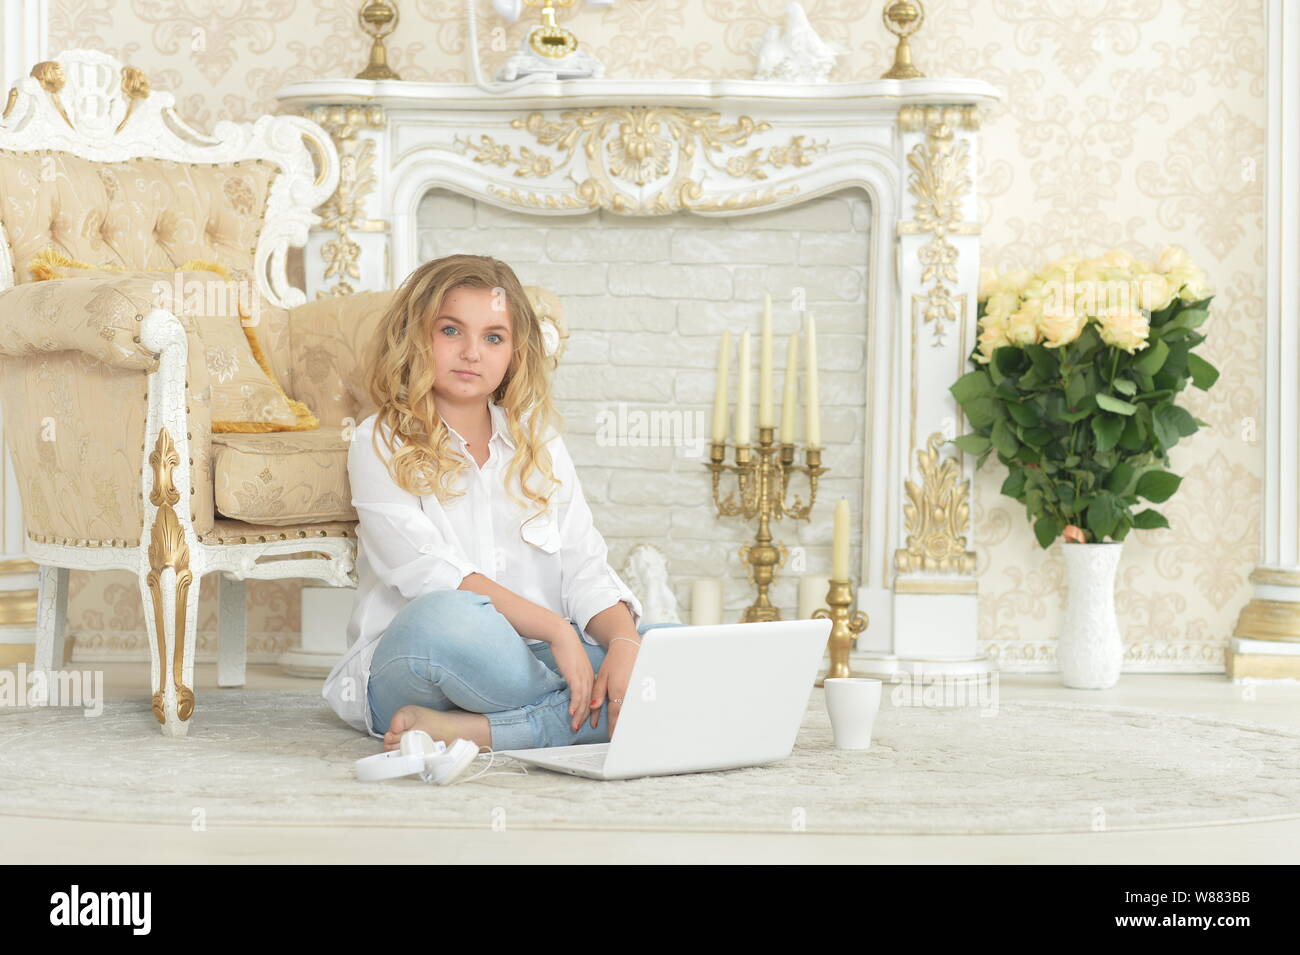 Curly blonde teenage girl in casual clothing sitting on floor Stock Photo